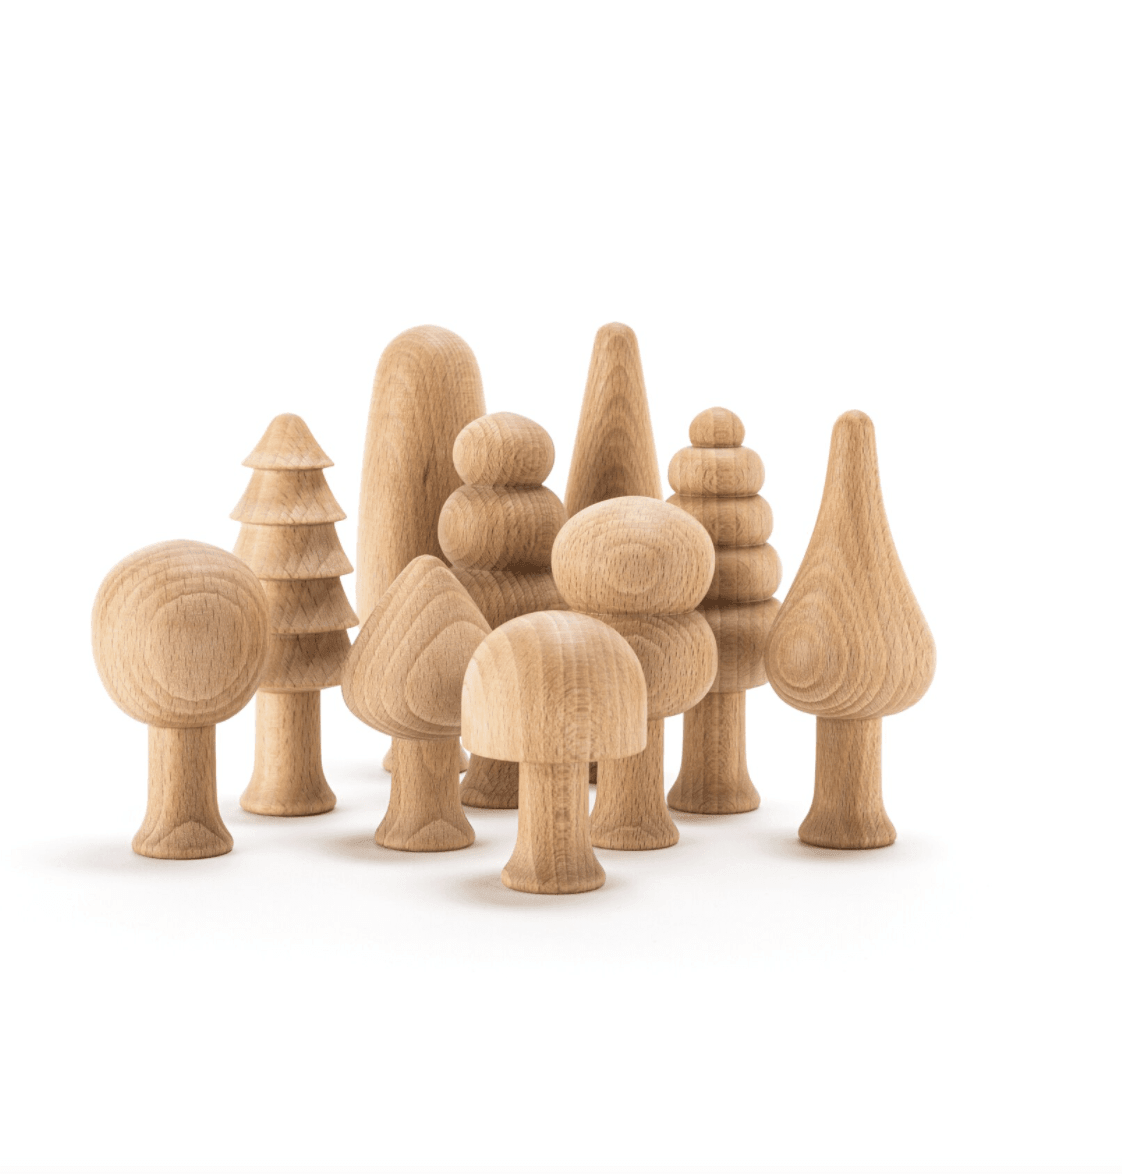 The Curated Parcel - Ocamora Forest Set of 10 